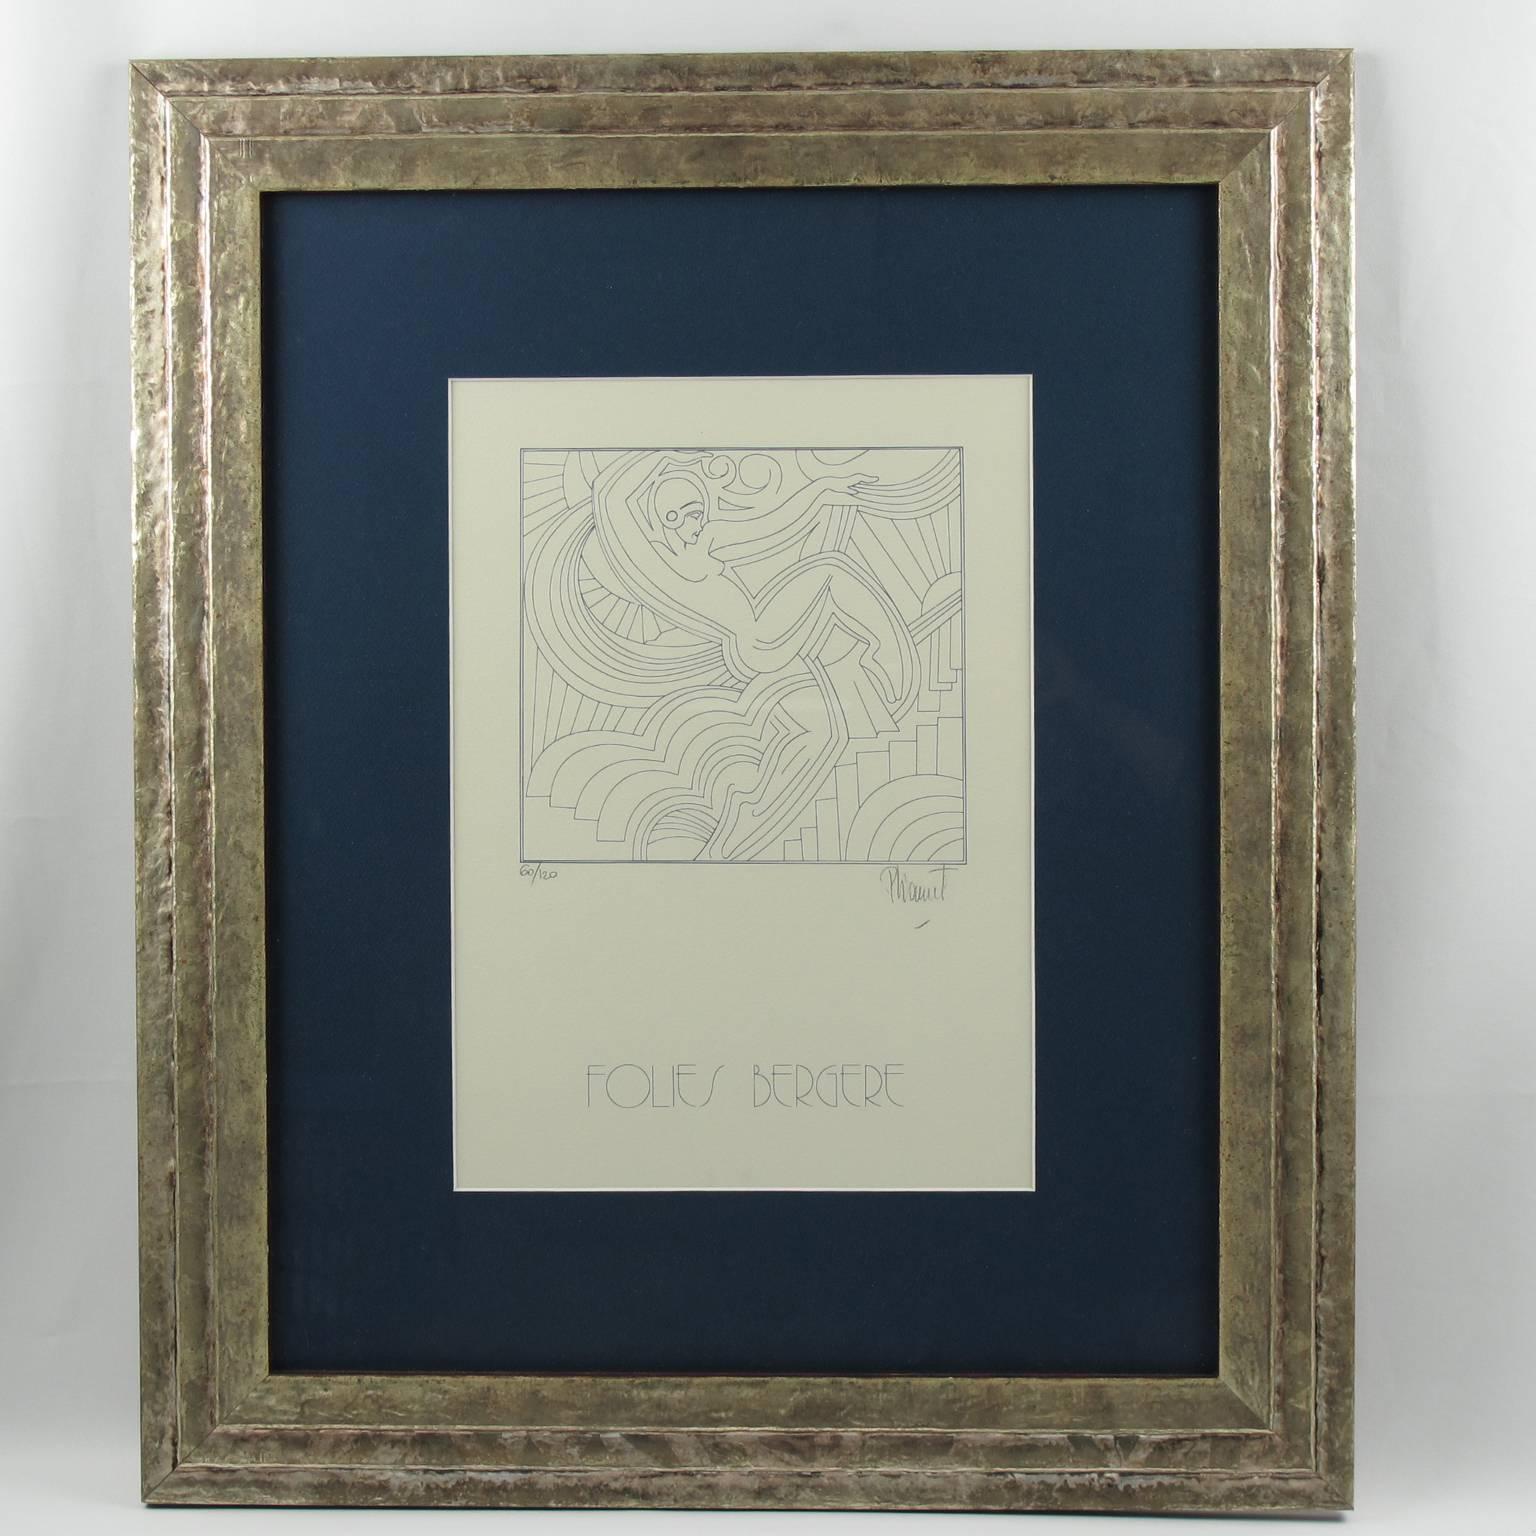 Limited edition blue ink lithograph by Patrick Lionnet, France, 1989. Featuring the iconic Art Deco design representing the engraving of the facade of the Folies Bergere in Paris, created in the 1930s by Maurice Picaud or Picauld, aka Pico.  Edition